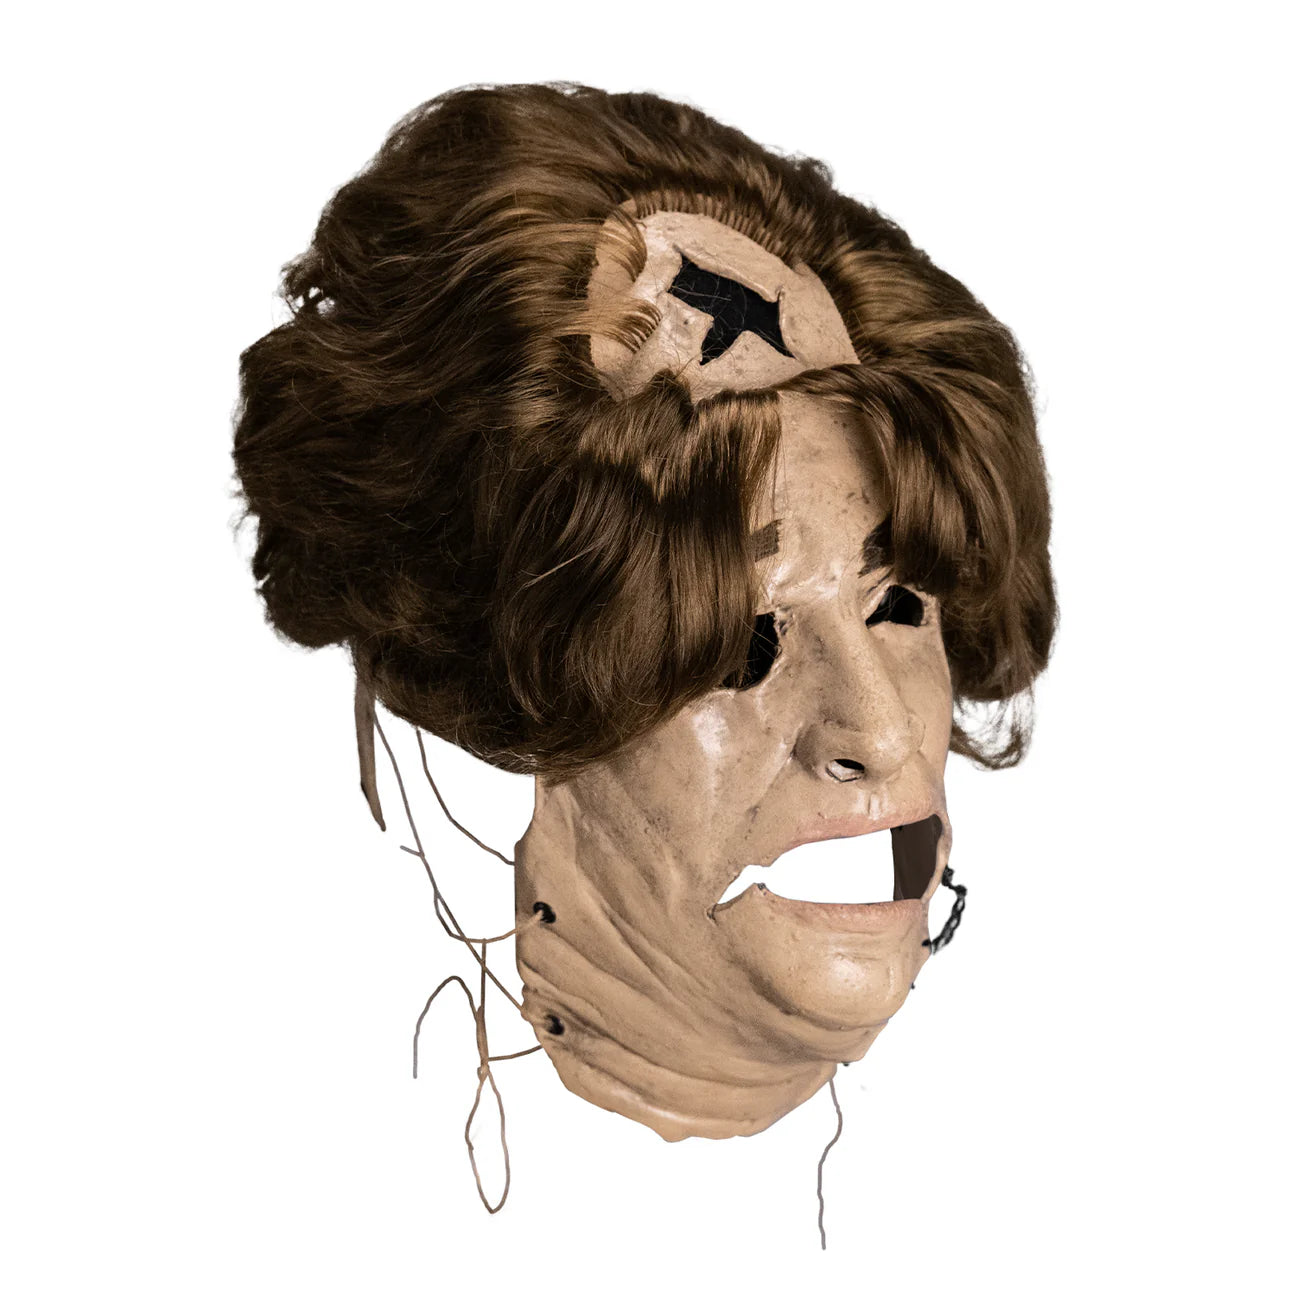 THE TEXAS CHAINSAW MASSACRE (1974) - LEATHERFACE OLD LADY MASK